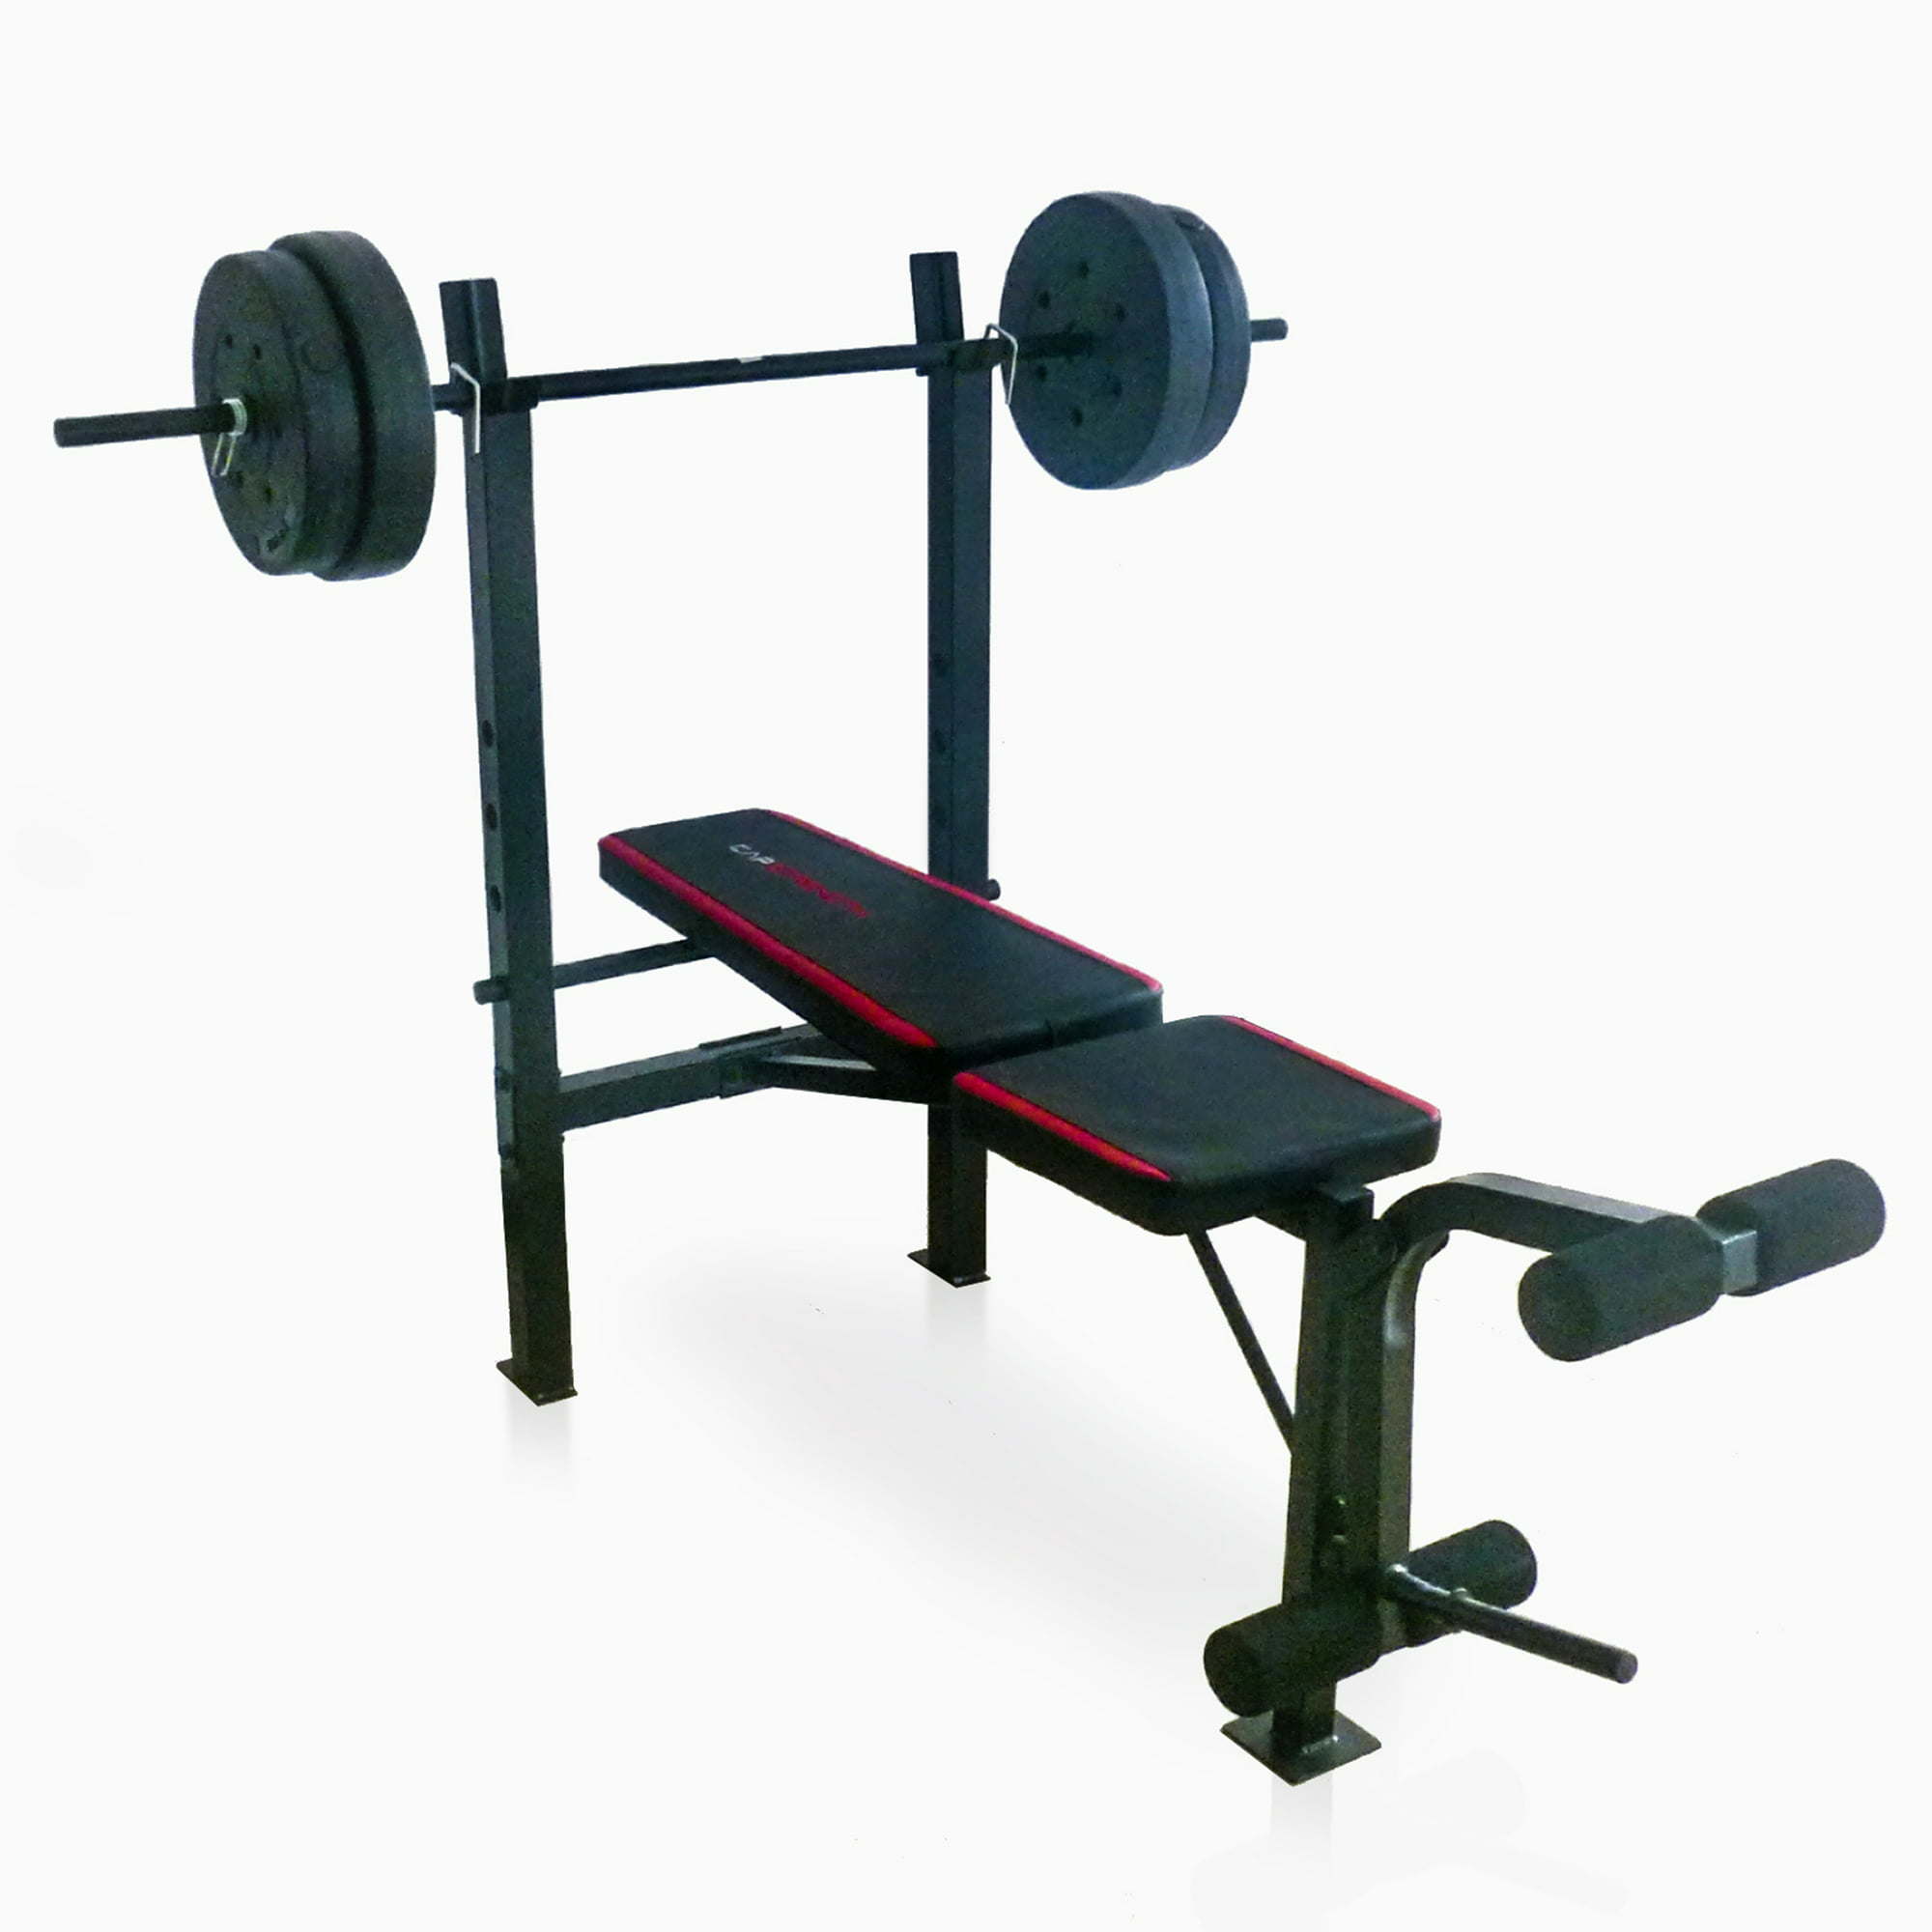 Strength Adjustable Standard Combo Weight Bench with Rack and Leg Extension and 90 lb. Vinyl Weight Set